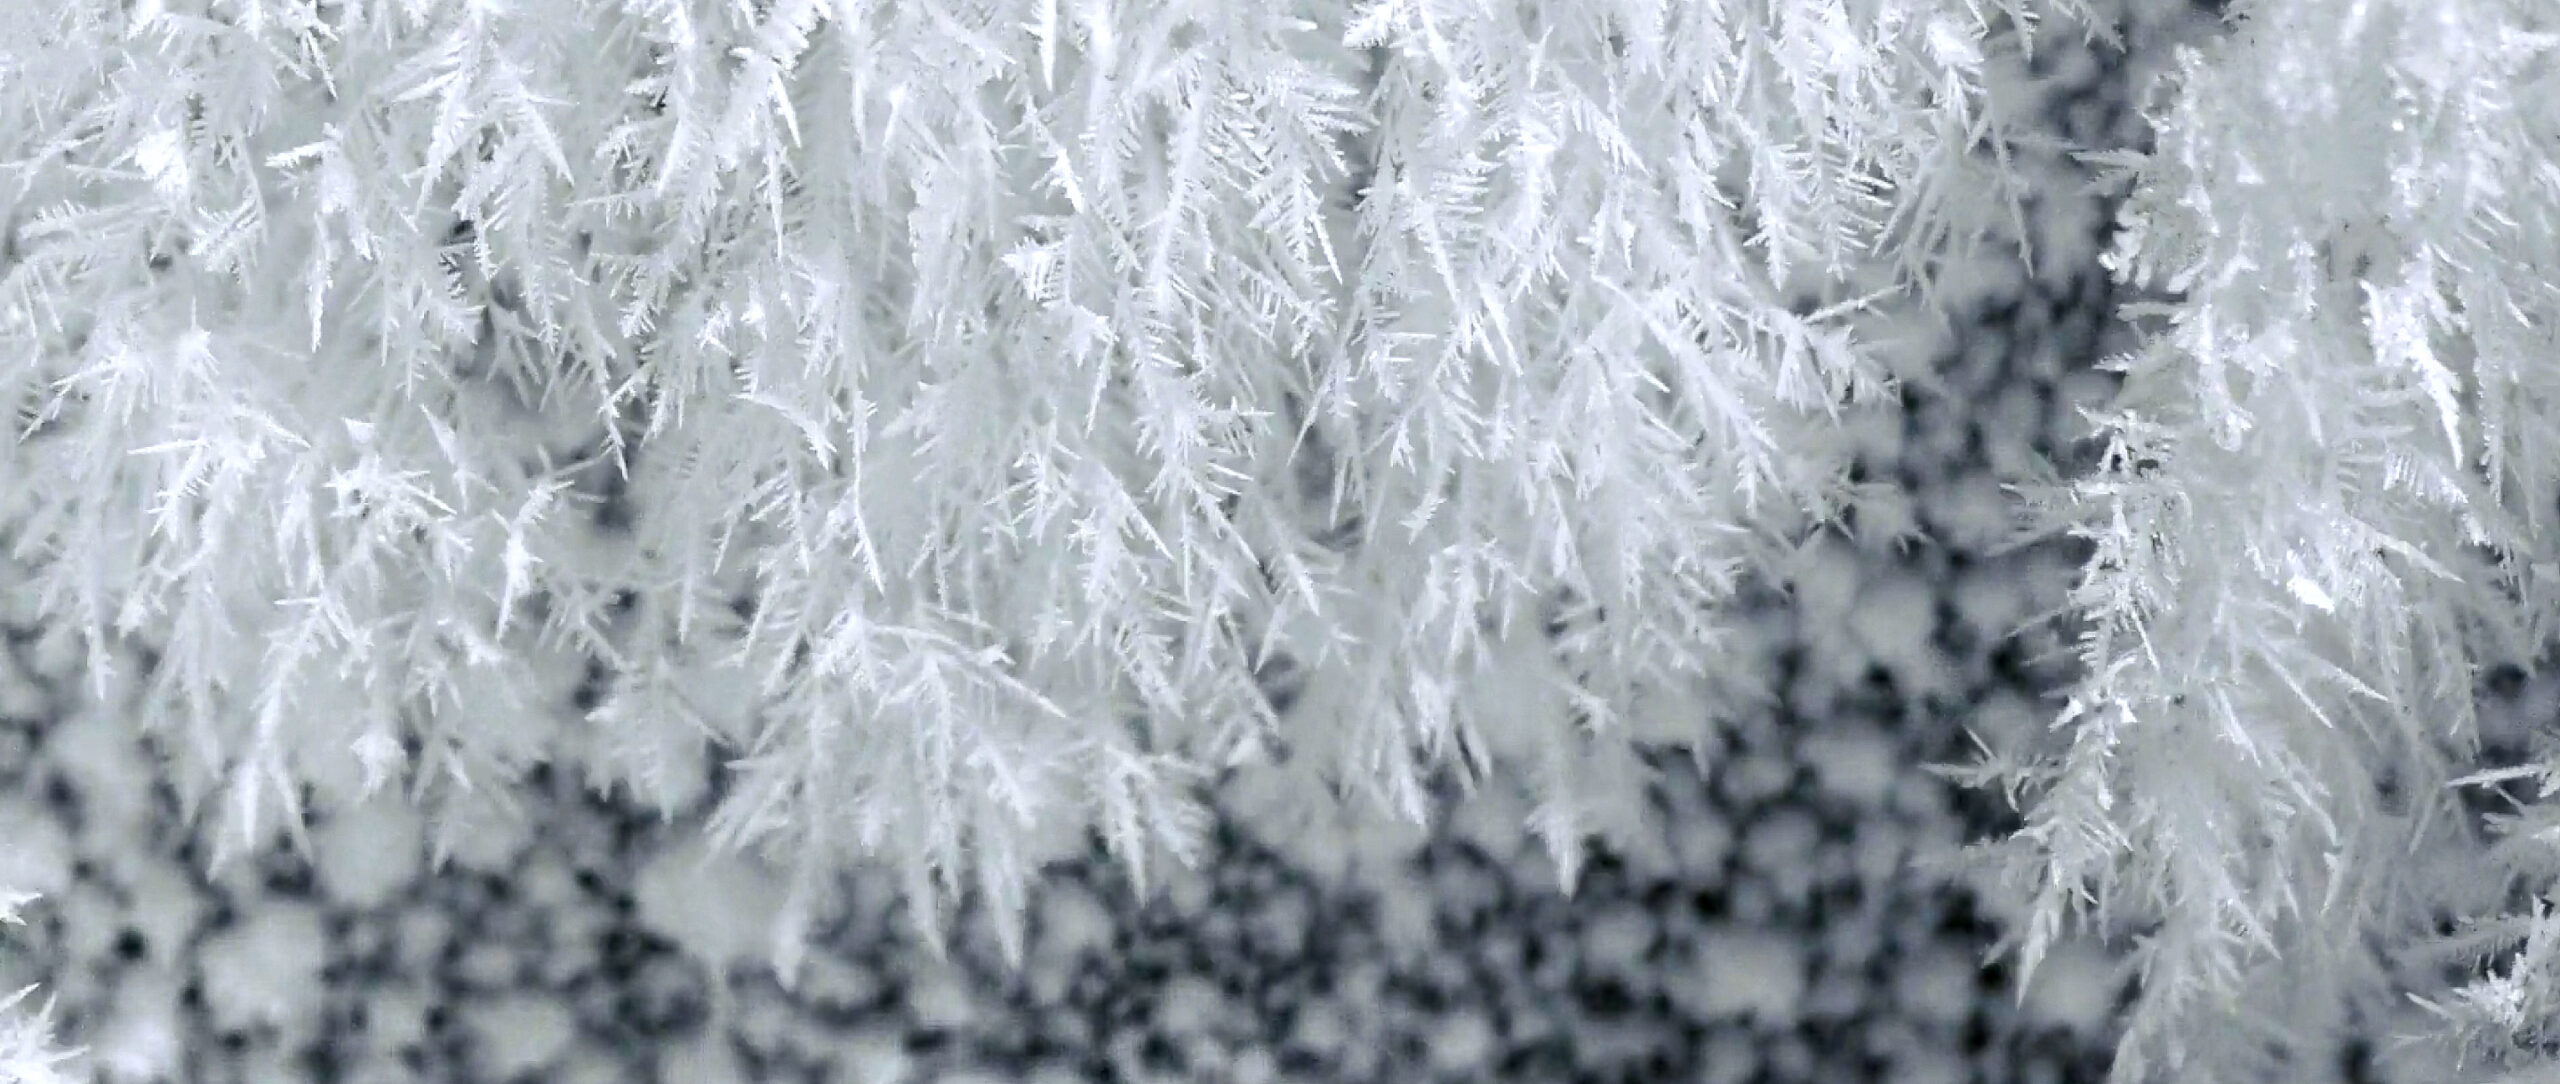 Dendritic ice crystals grow from top to bottom across the frame of a video.